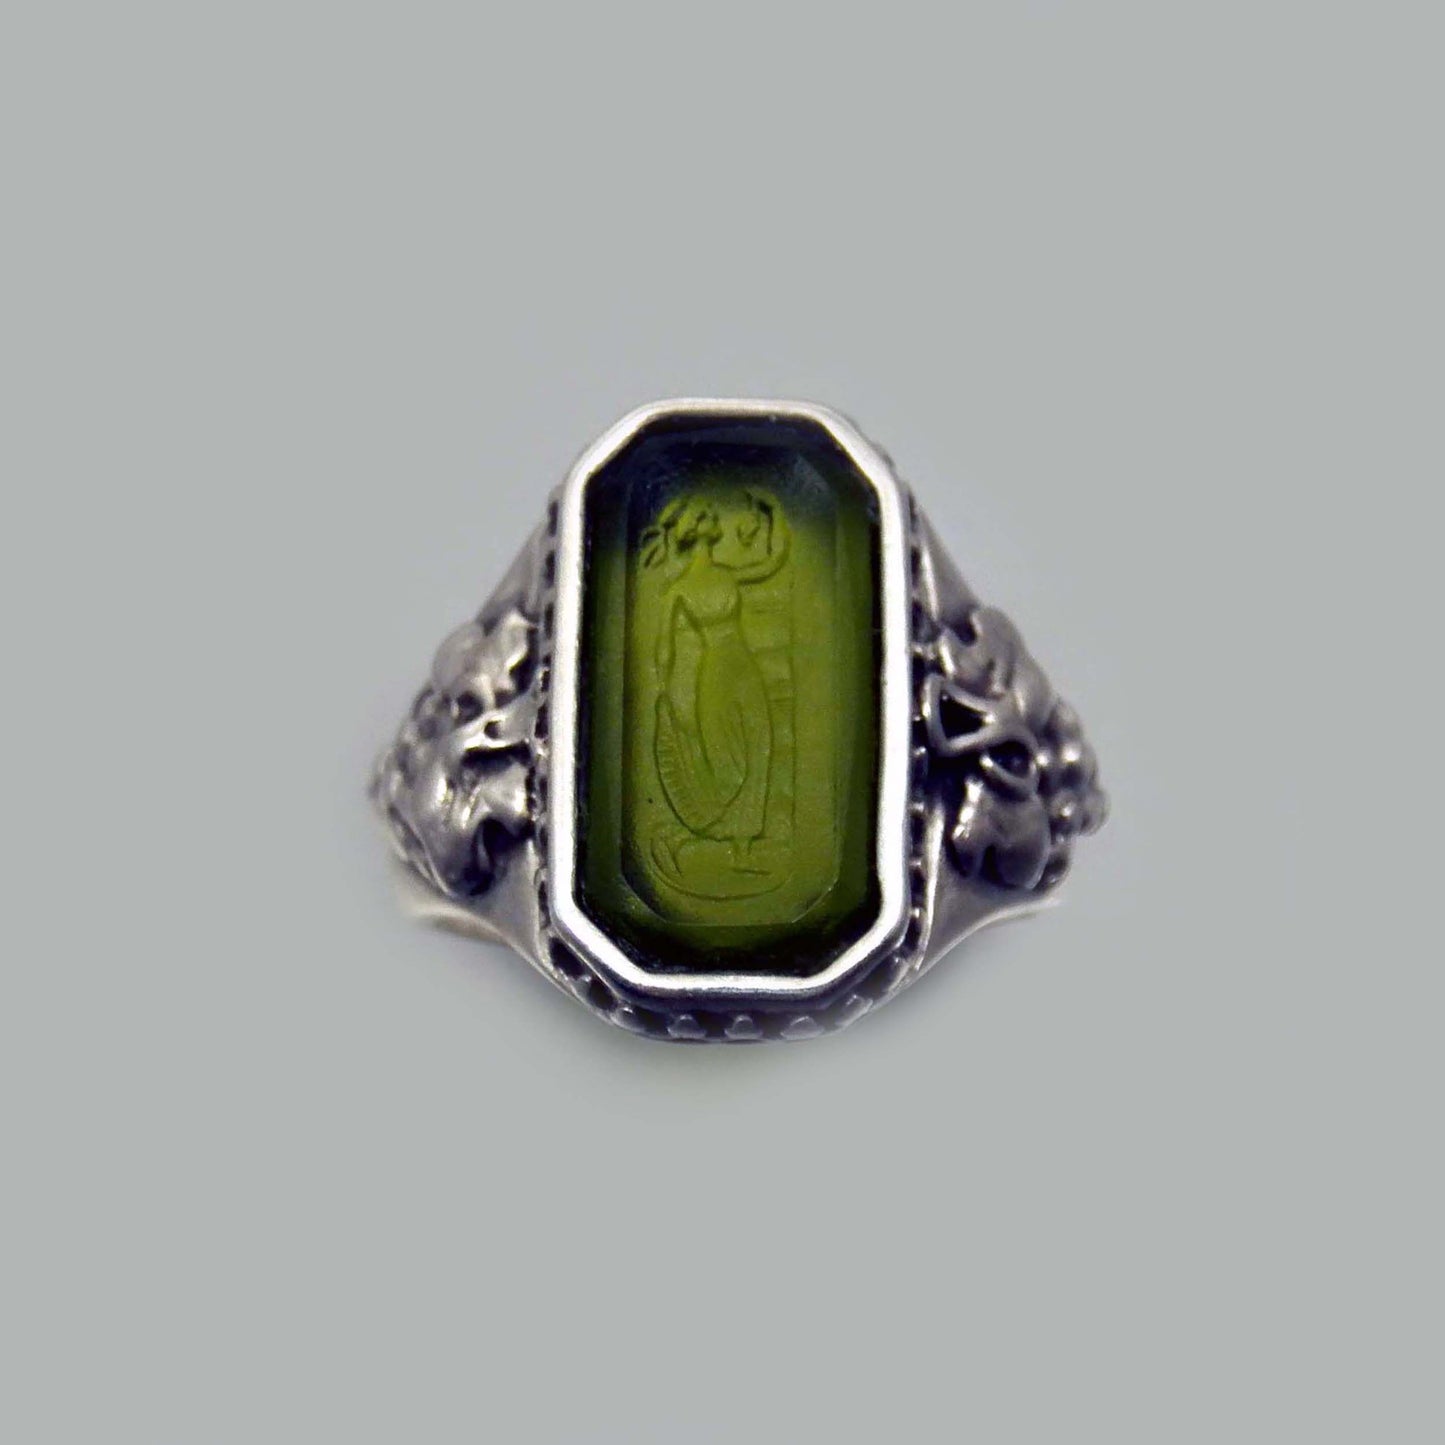 Lady with Grapes Seal  Ring in Sterling Silver 